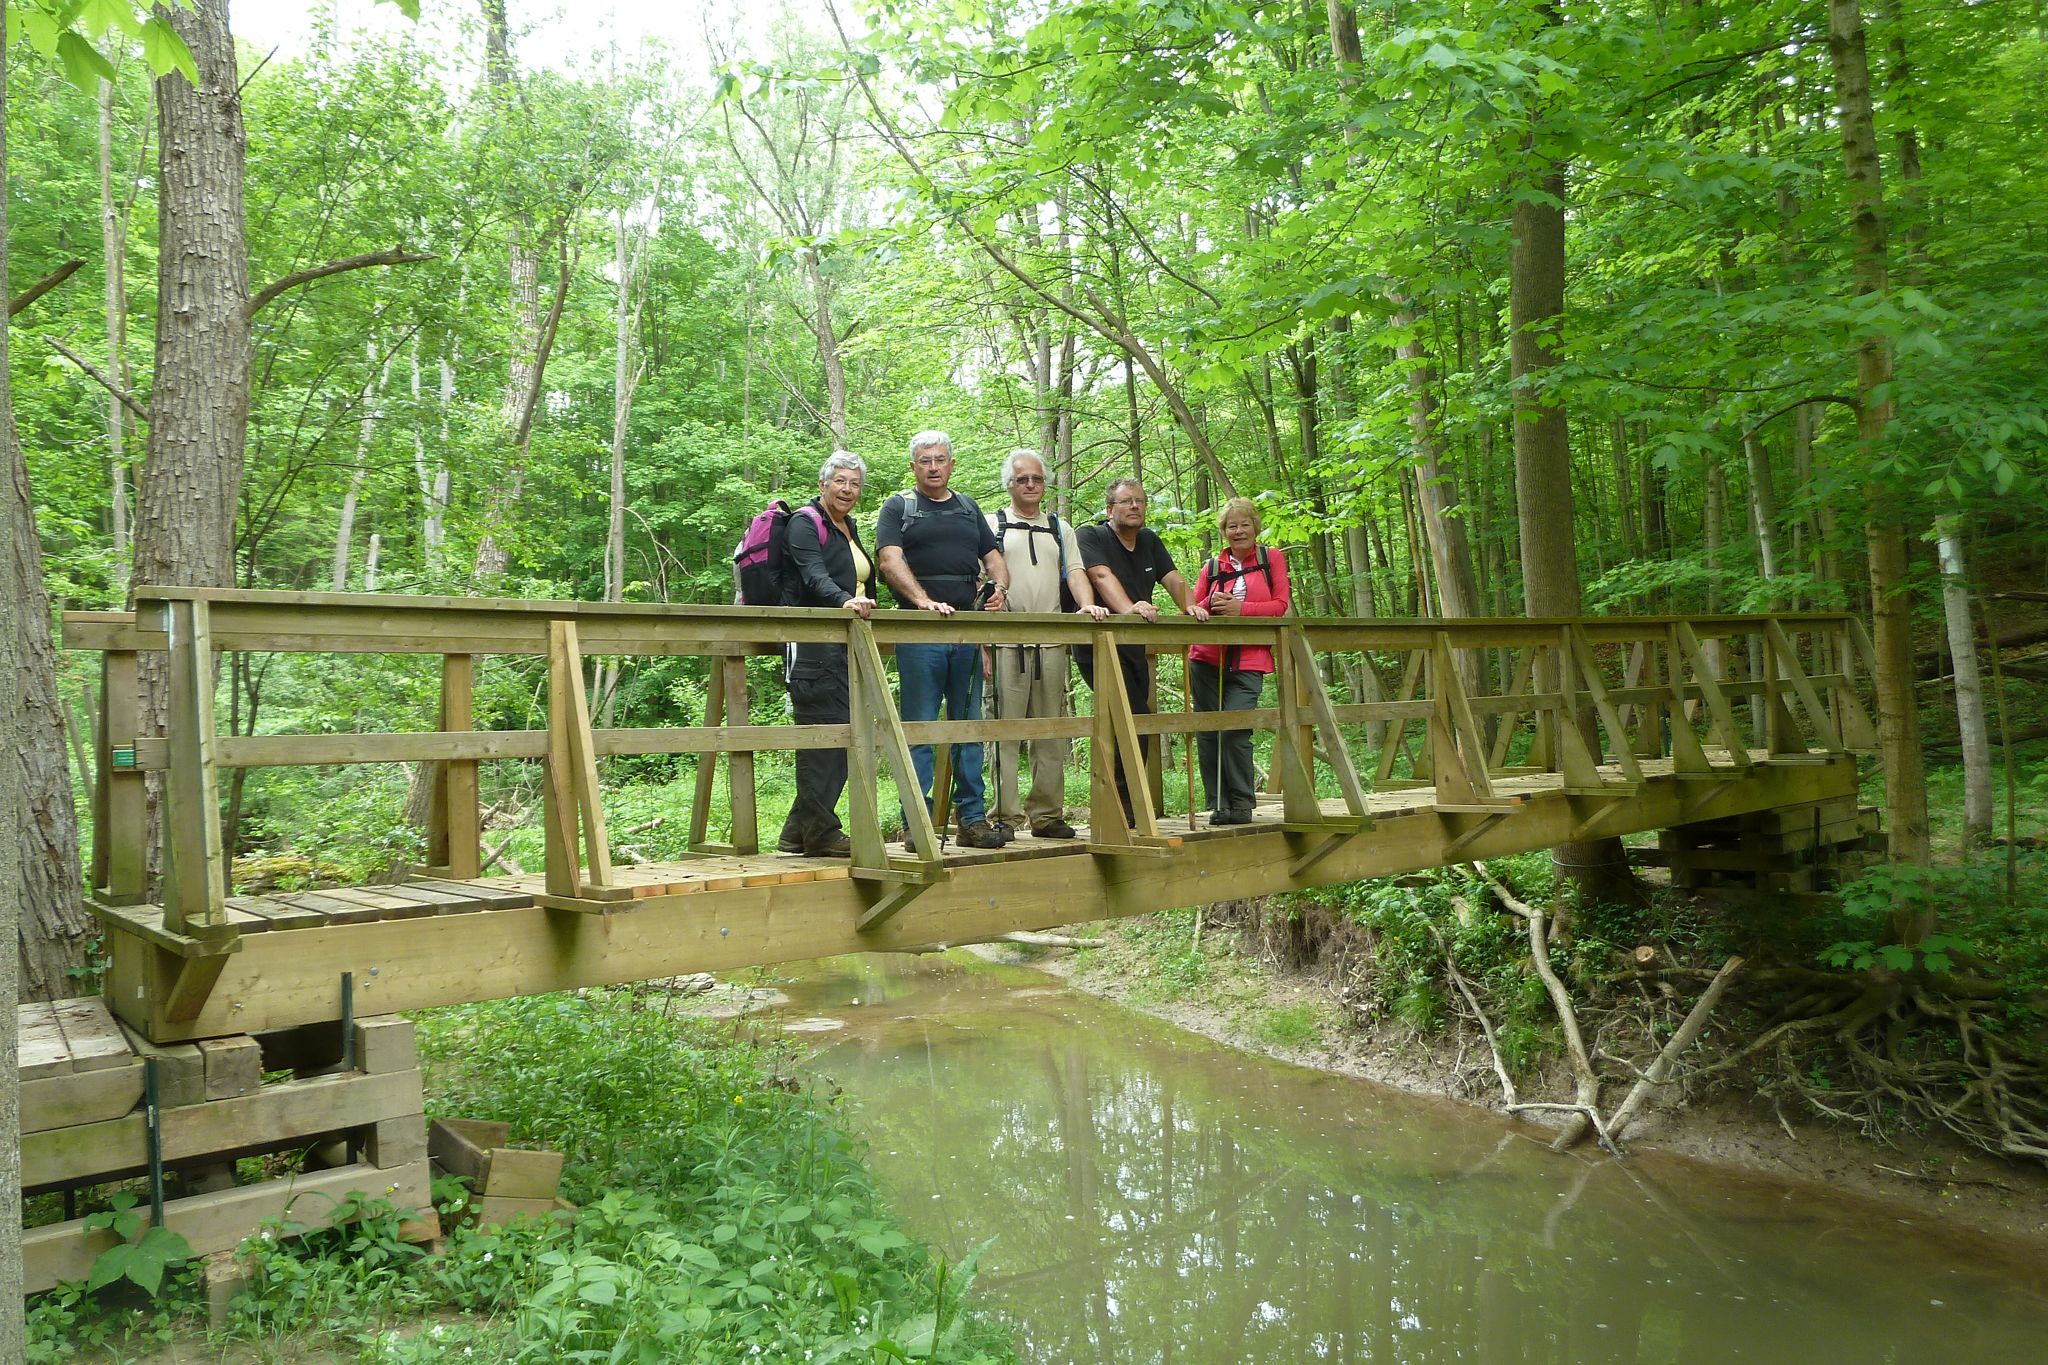 Group posing on great bridge Thames Valley Trail Club built for everyone's enjoyment.